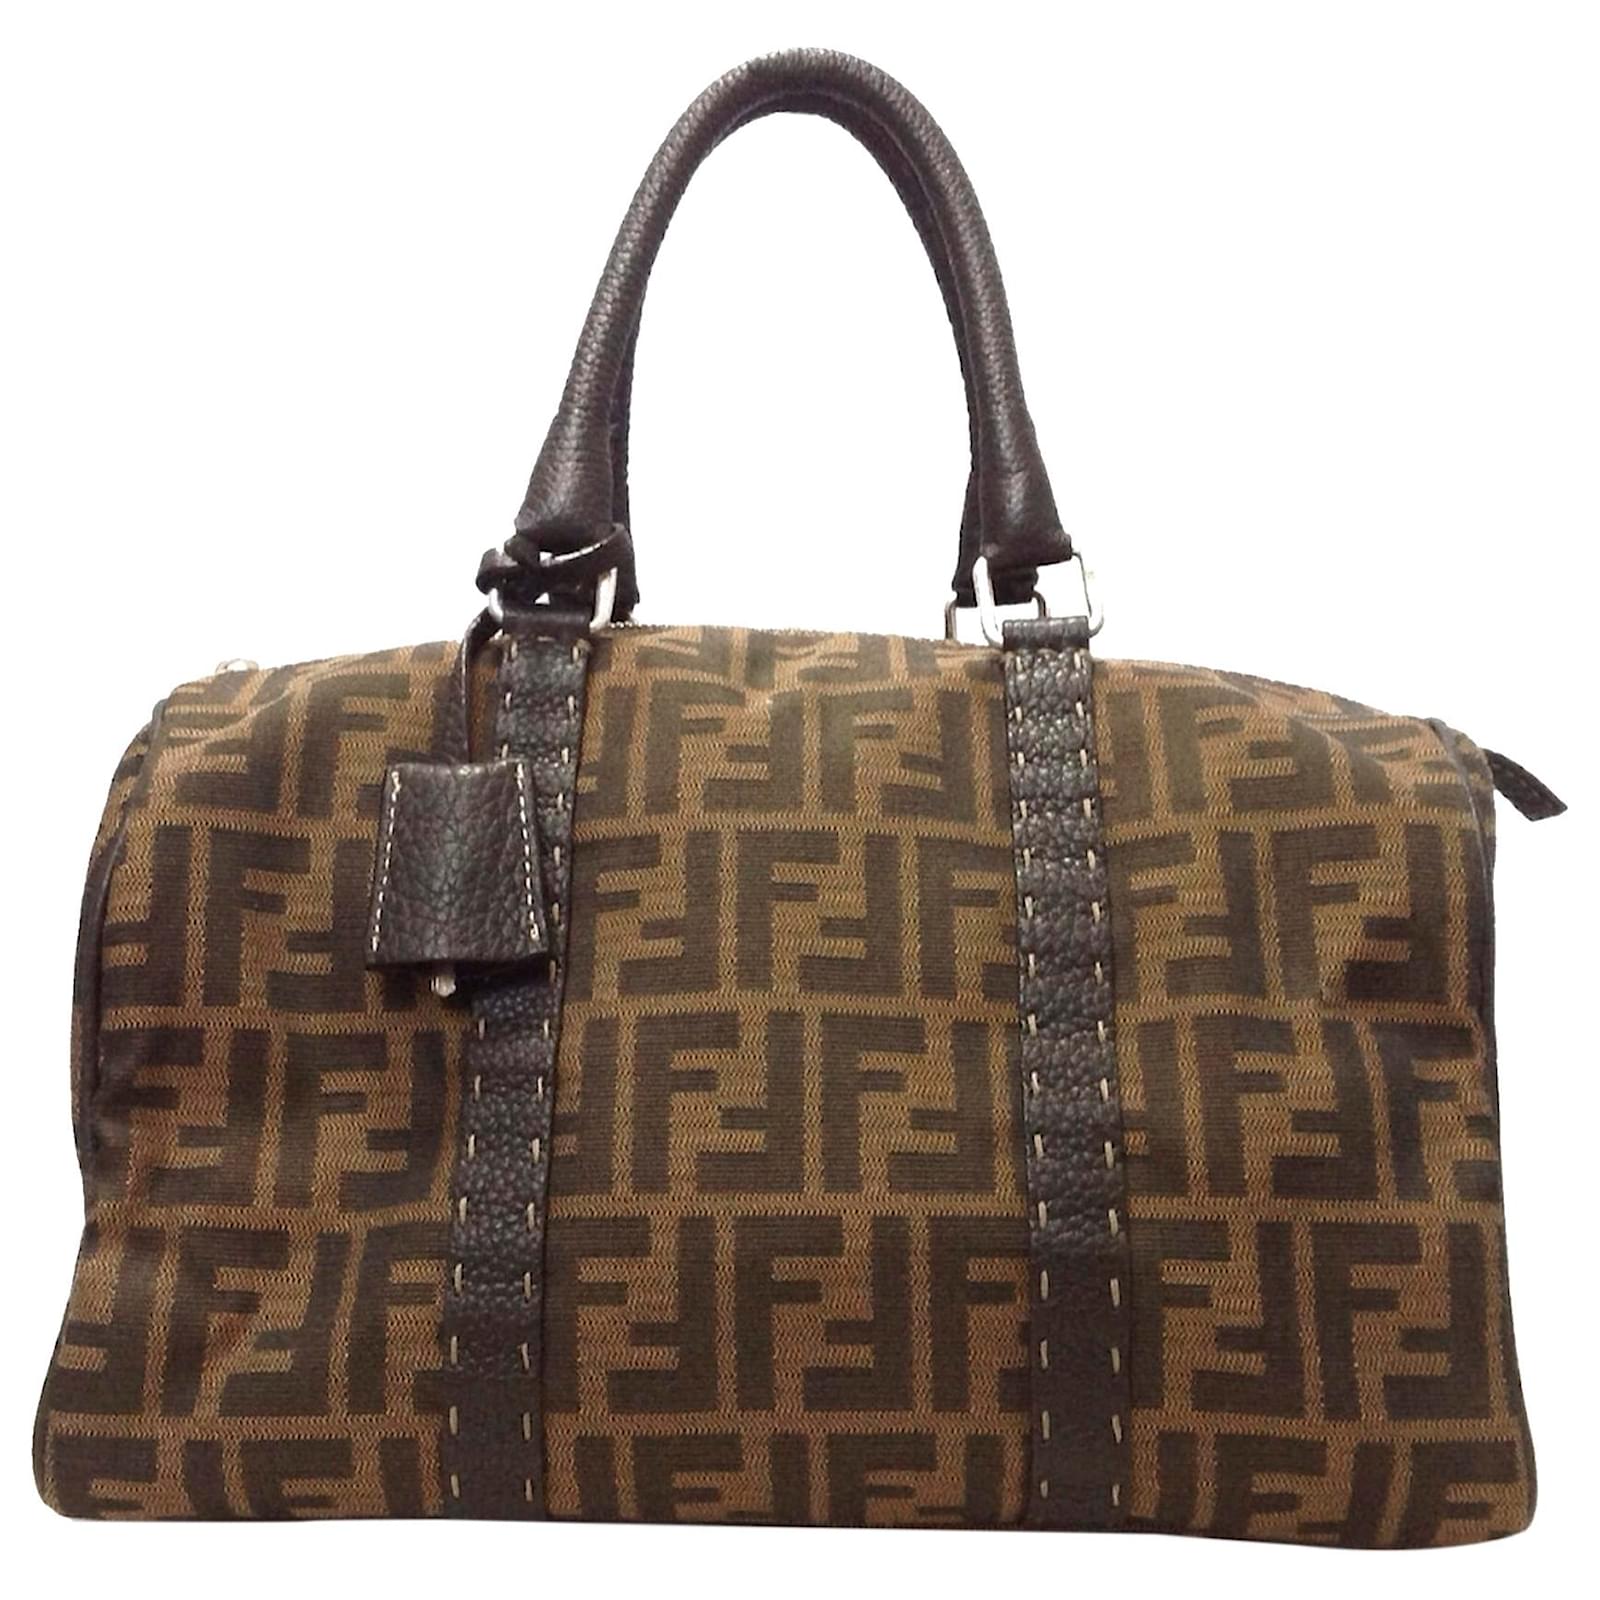 Fendi Leather-Trimmed Zucca Boston Bag - Brown Handle Bags